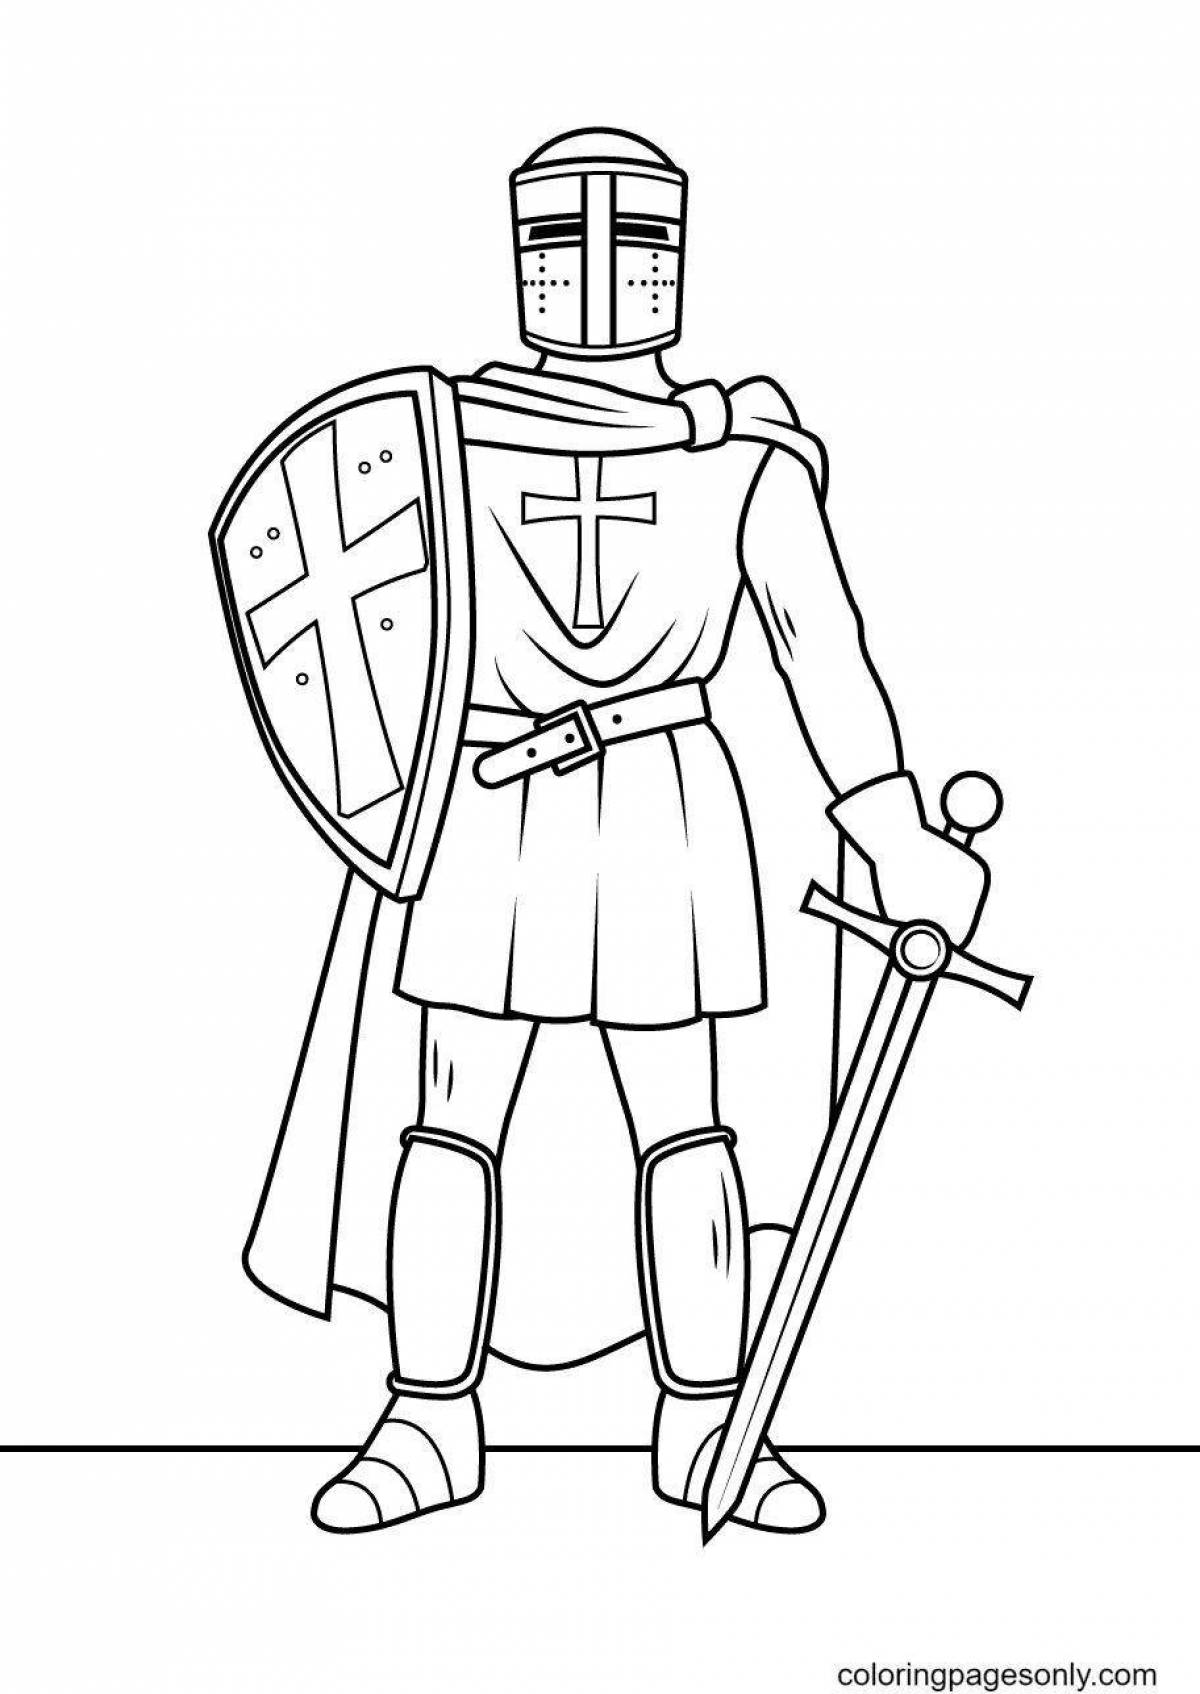 Royal coloring knight in armor